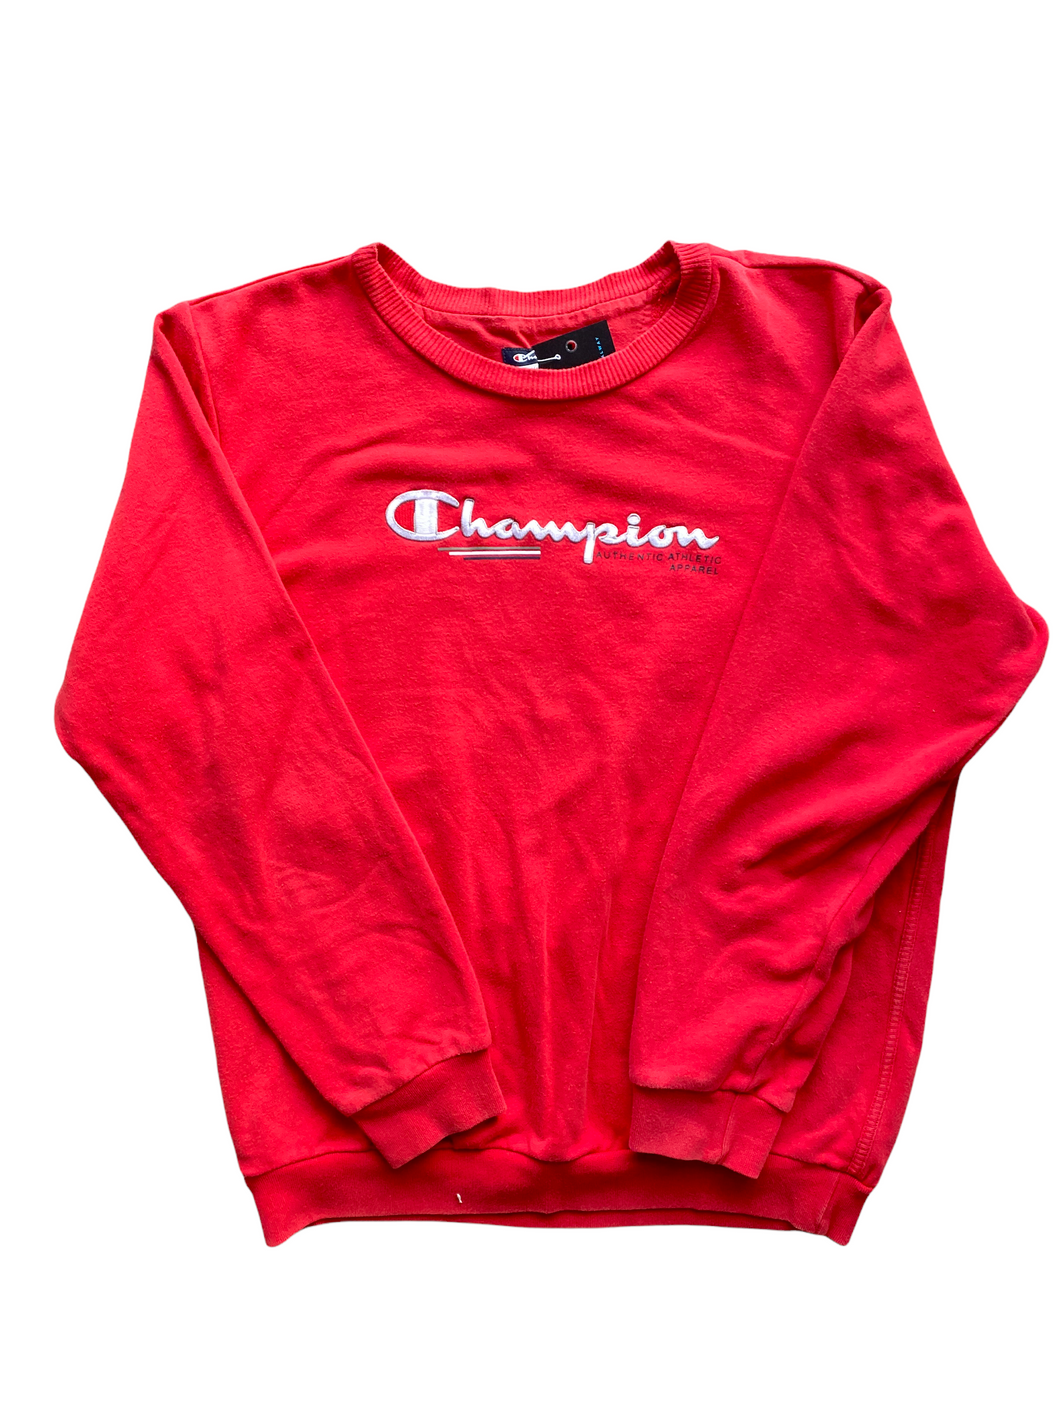 red champion sweater vintage 